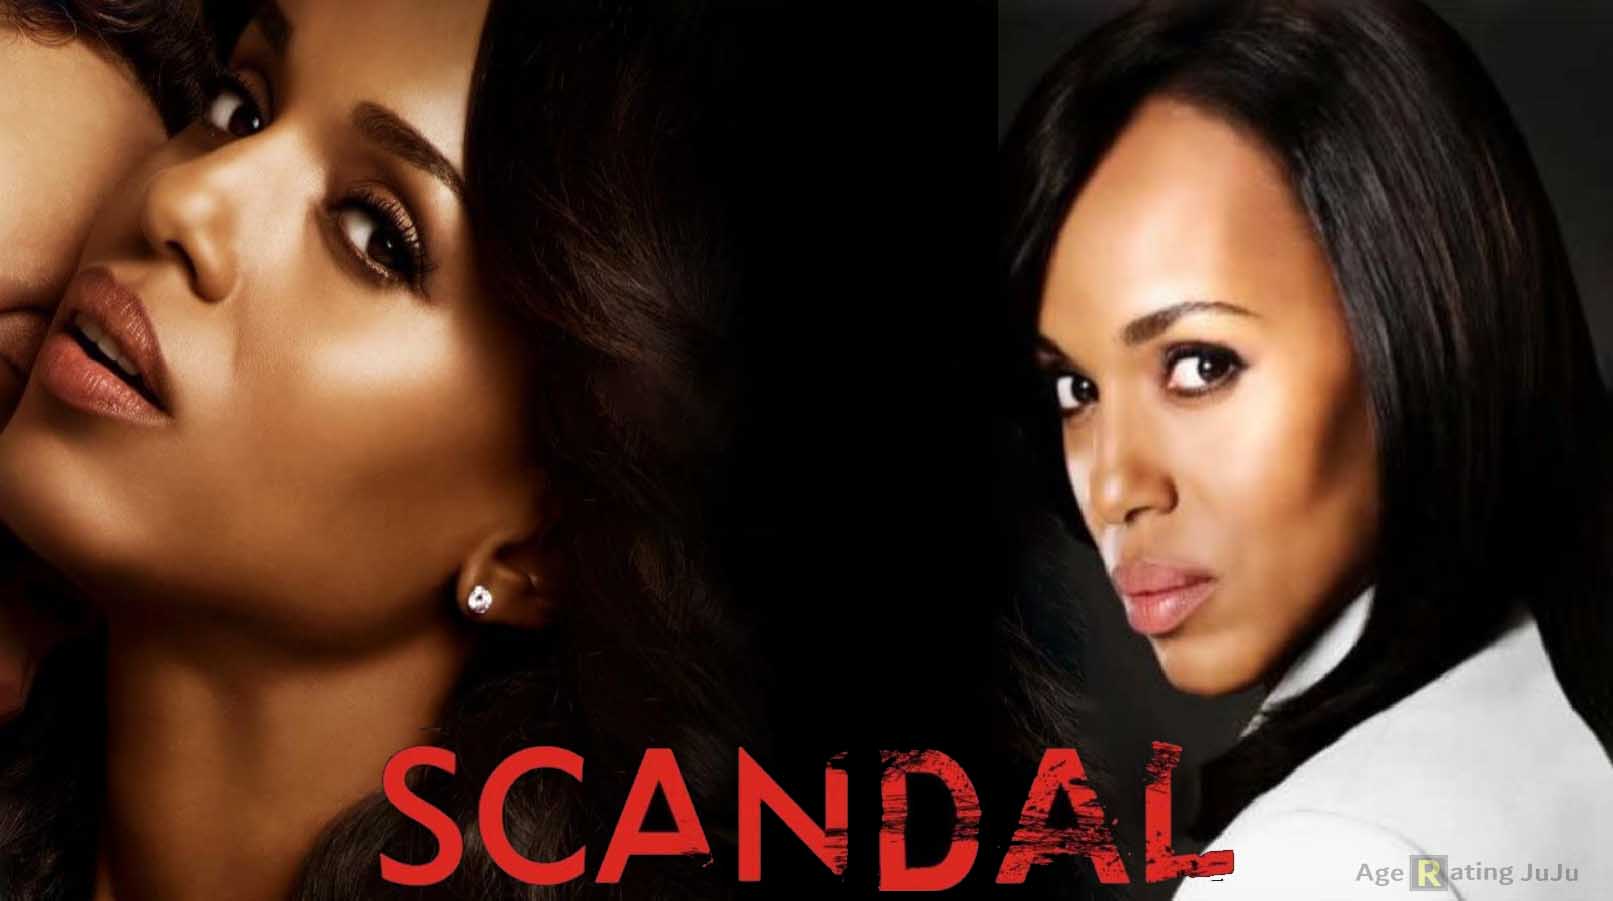 Scandal Age Rating 2018 - TV Show Netflix Poster Images and Wallpapers